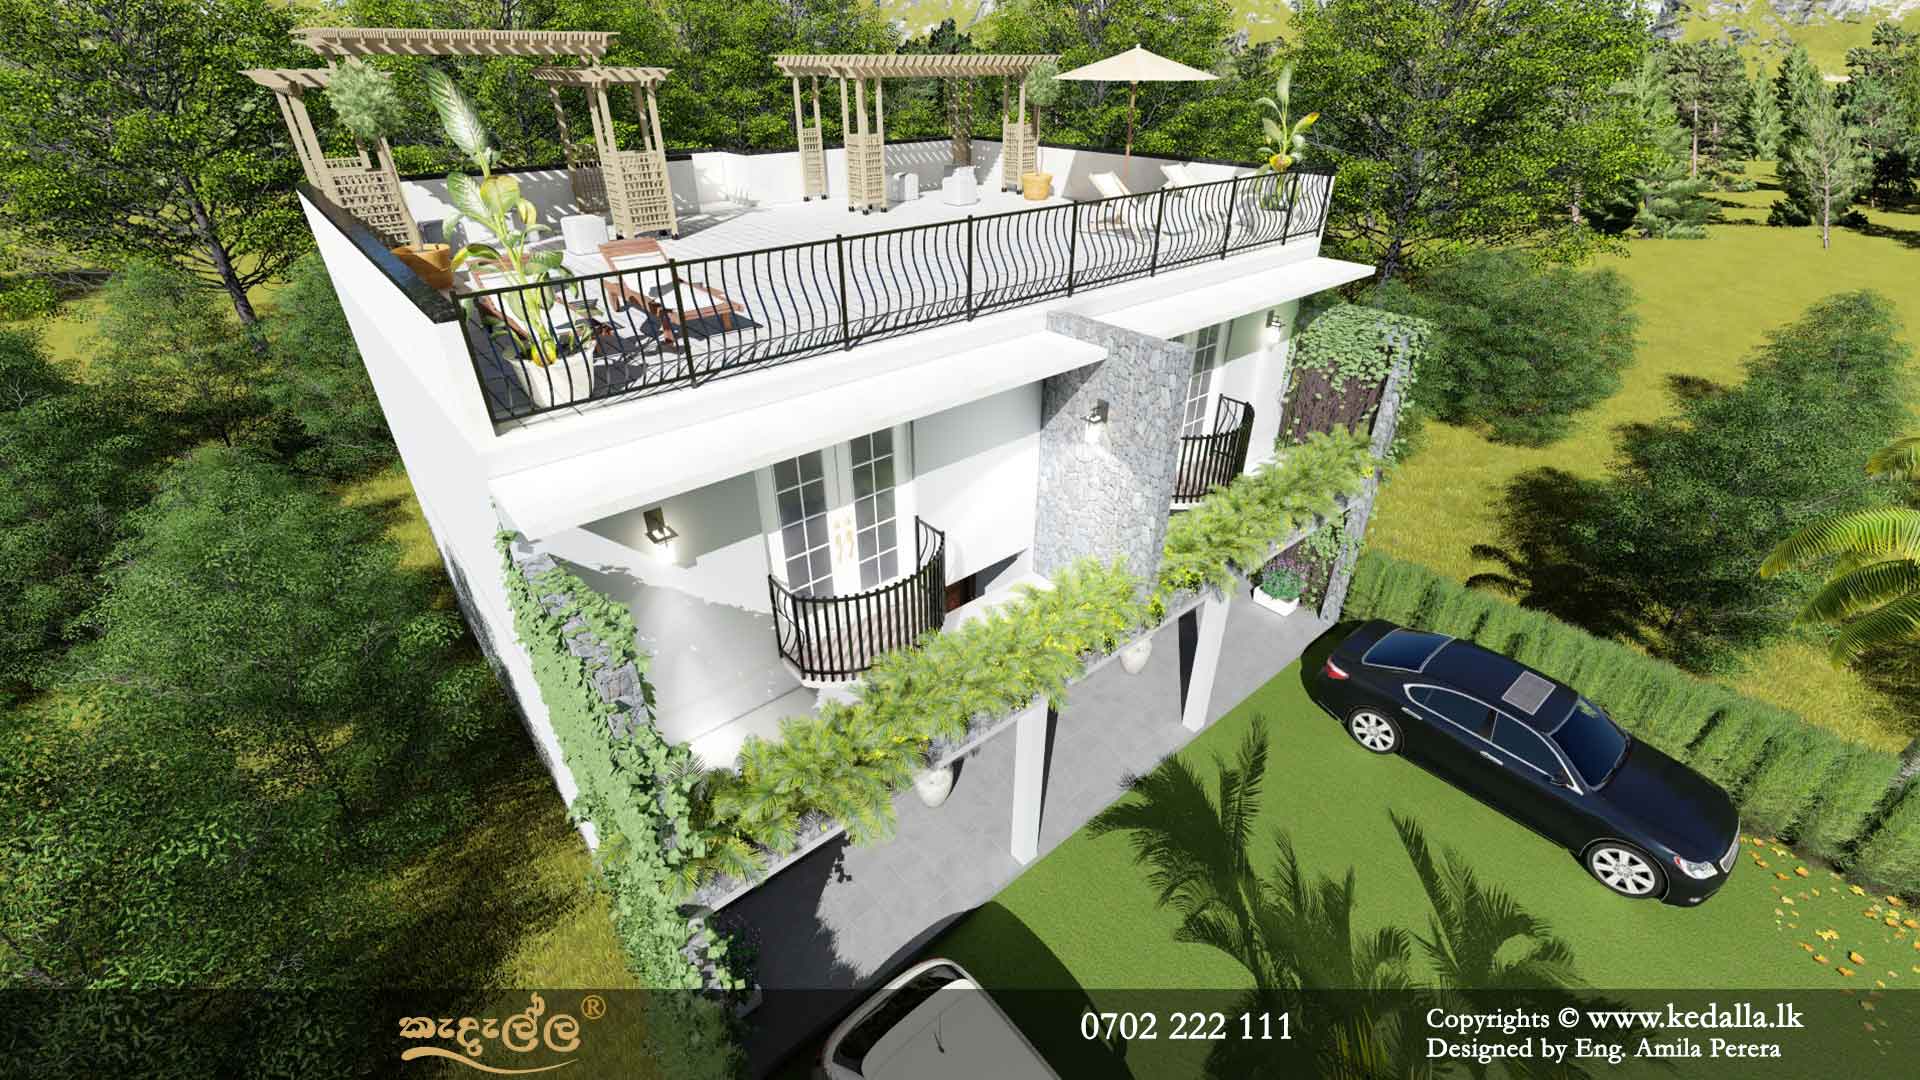 House designers perform site analysis and create house plot plans/Sketches at the begining